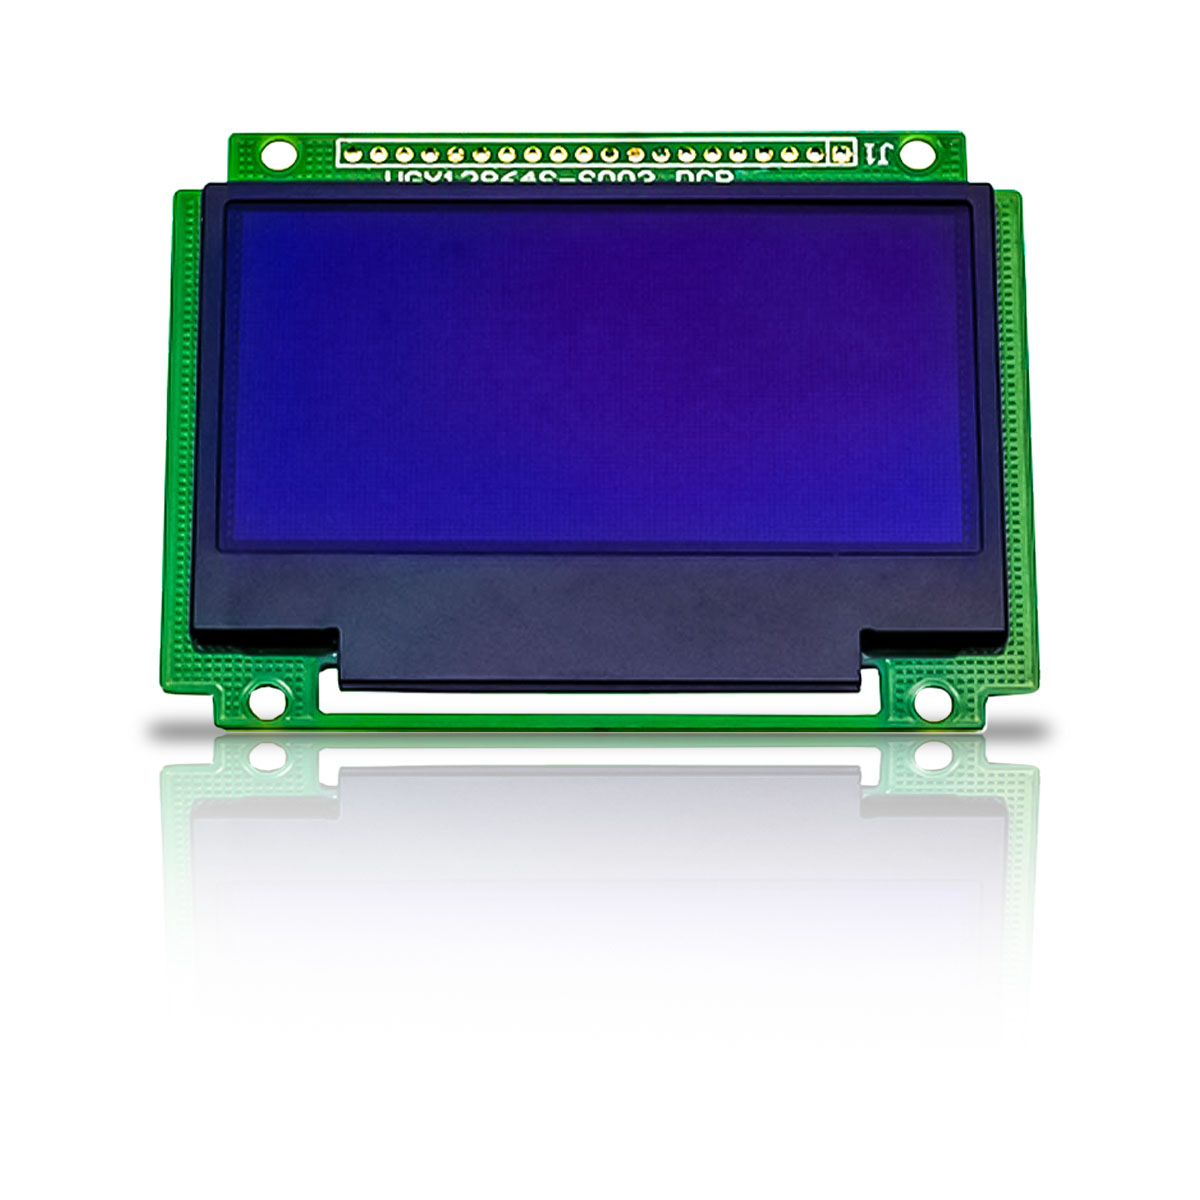 OLED Graphic Display Modules